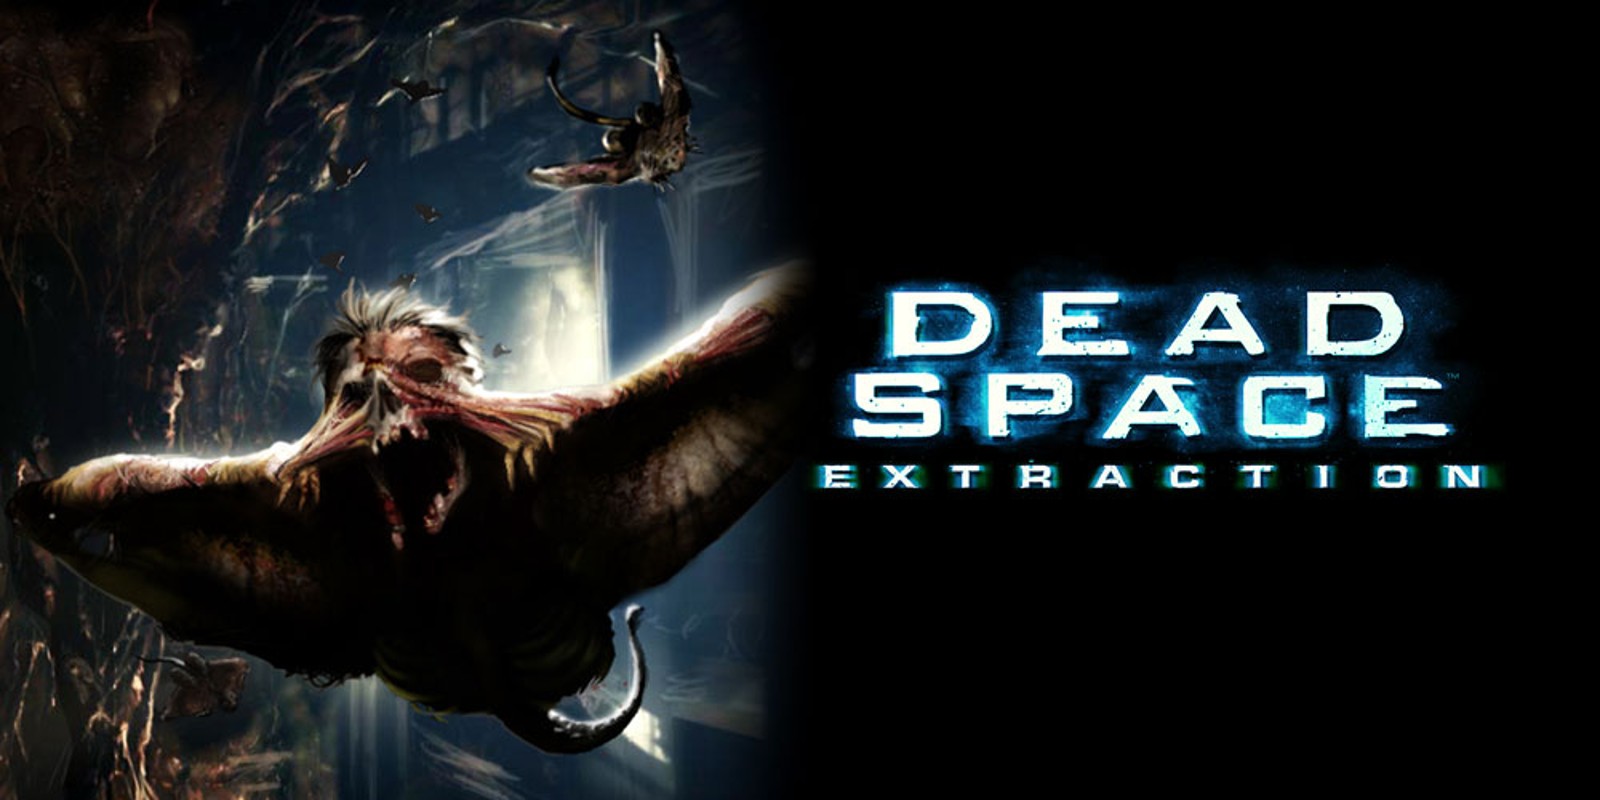 Dead Space Extraction | Wii | Games | Nintendo1600 x 800